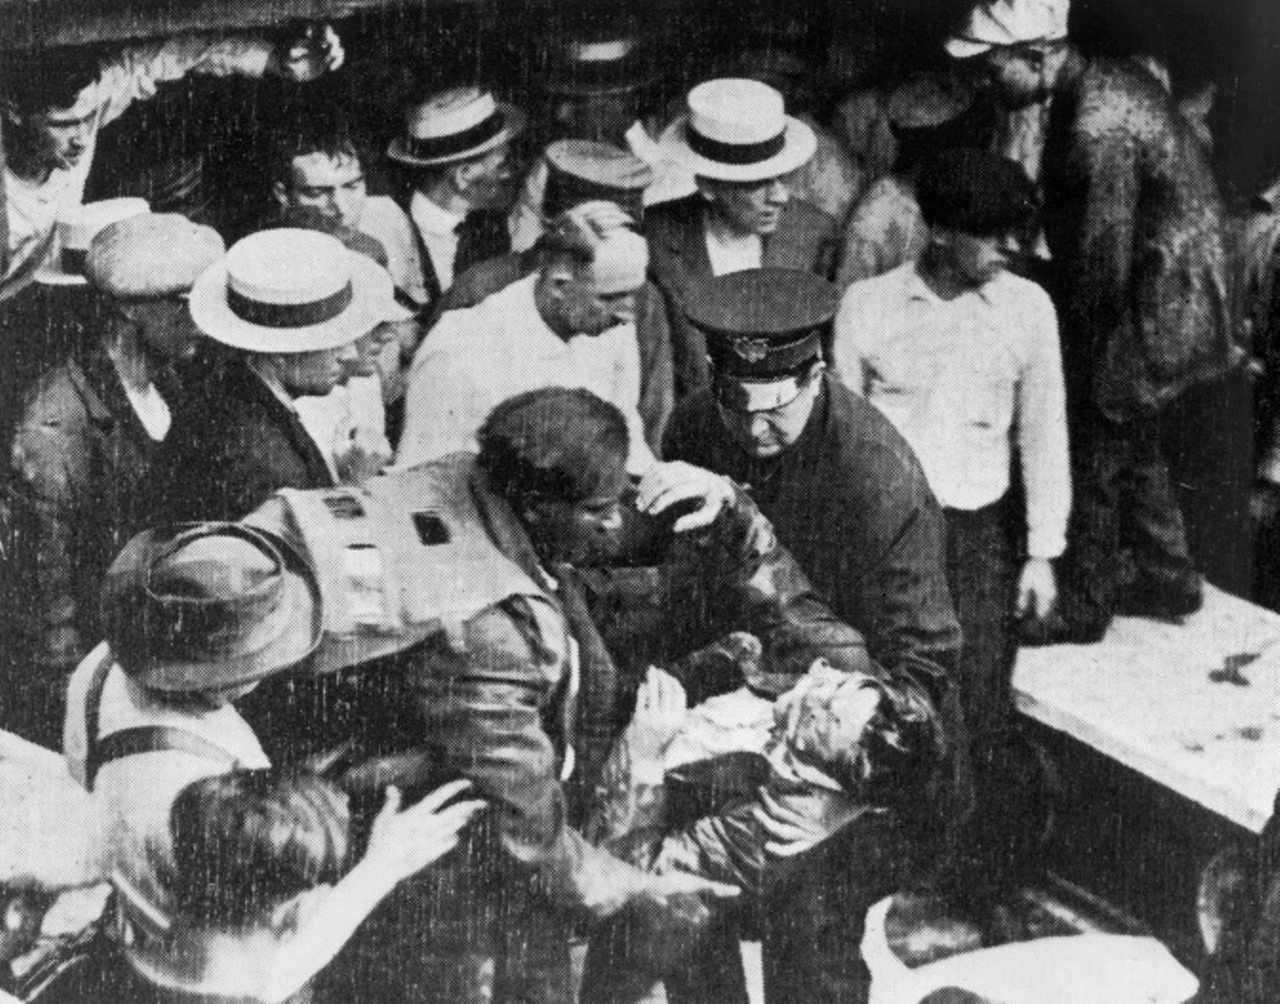 Six different Waterworks Tunnel disasters occurred during the construction of water intake tunnels for Cleveland's water system, killing a total of 58 men between the years 1898 and 1916. In this photo, a group is helping a victim of the July 24, 1916 explosion that killed 21 people.